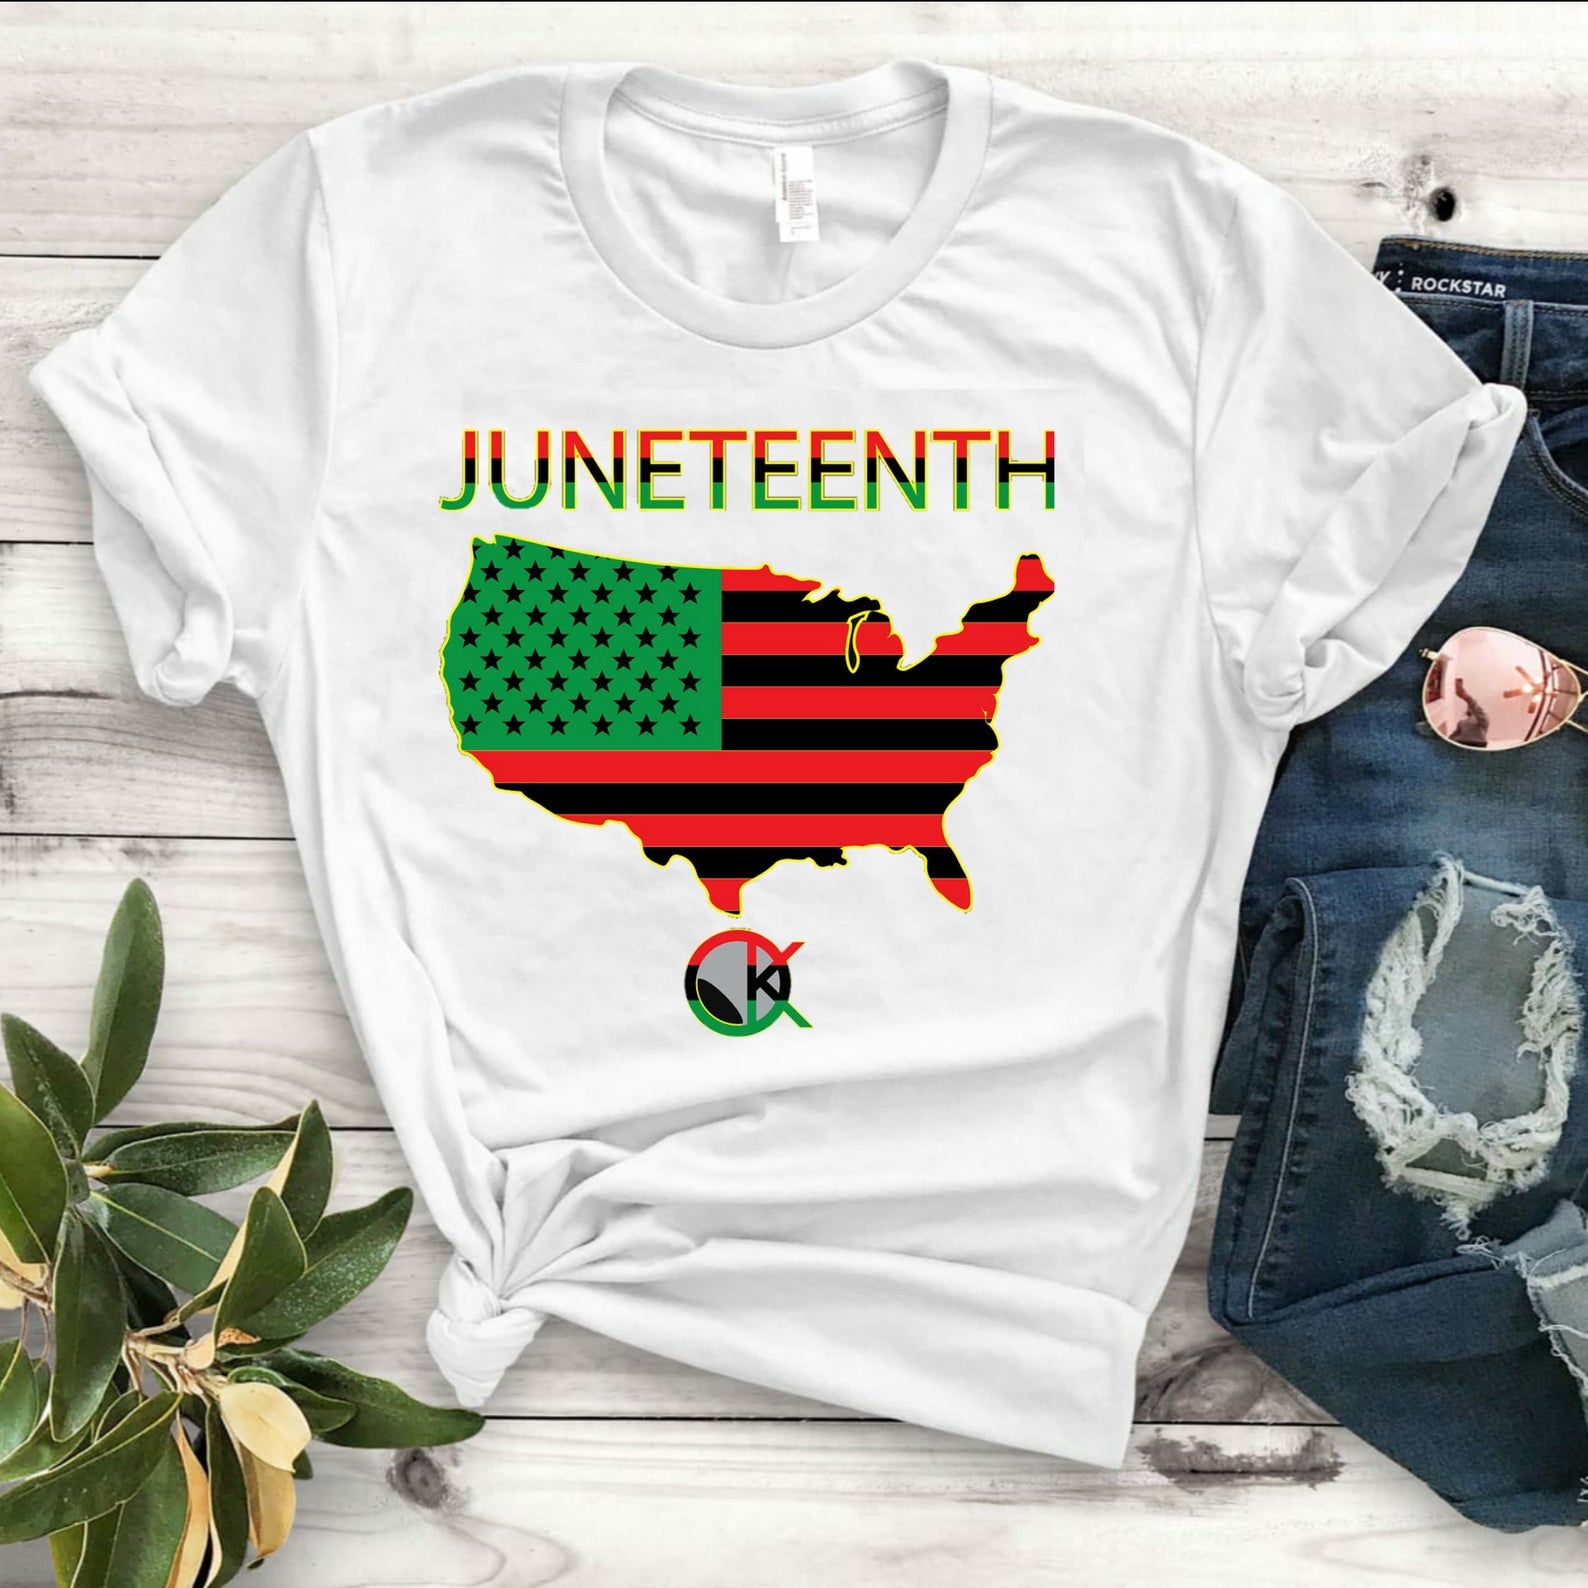 It's Juneteenth! Here Are The T-Shirts You Need to Celebrate Our Freedom In Style